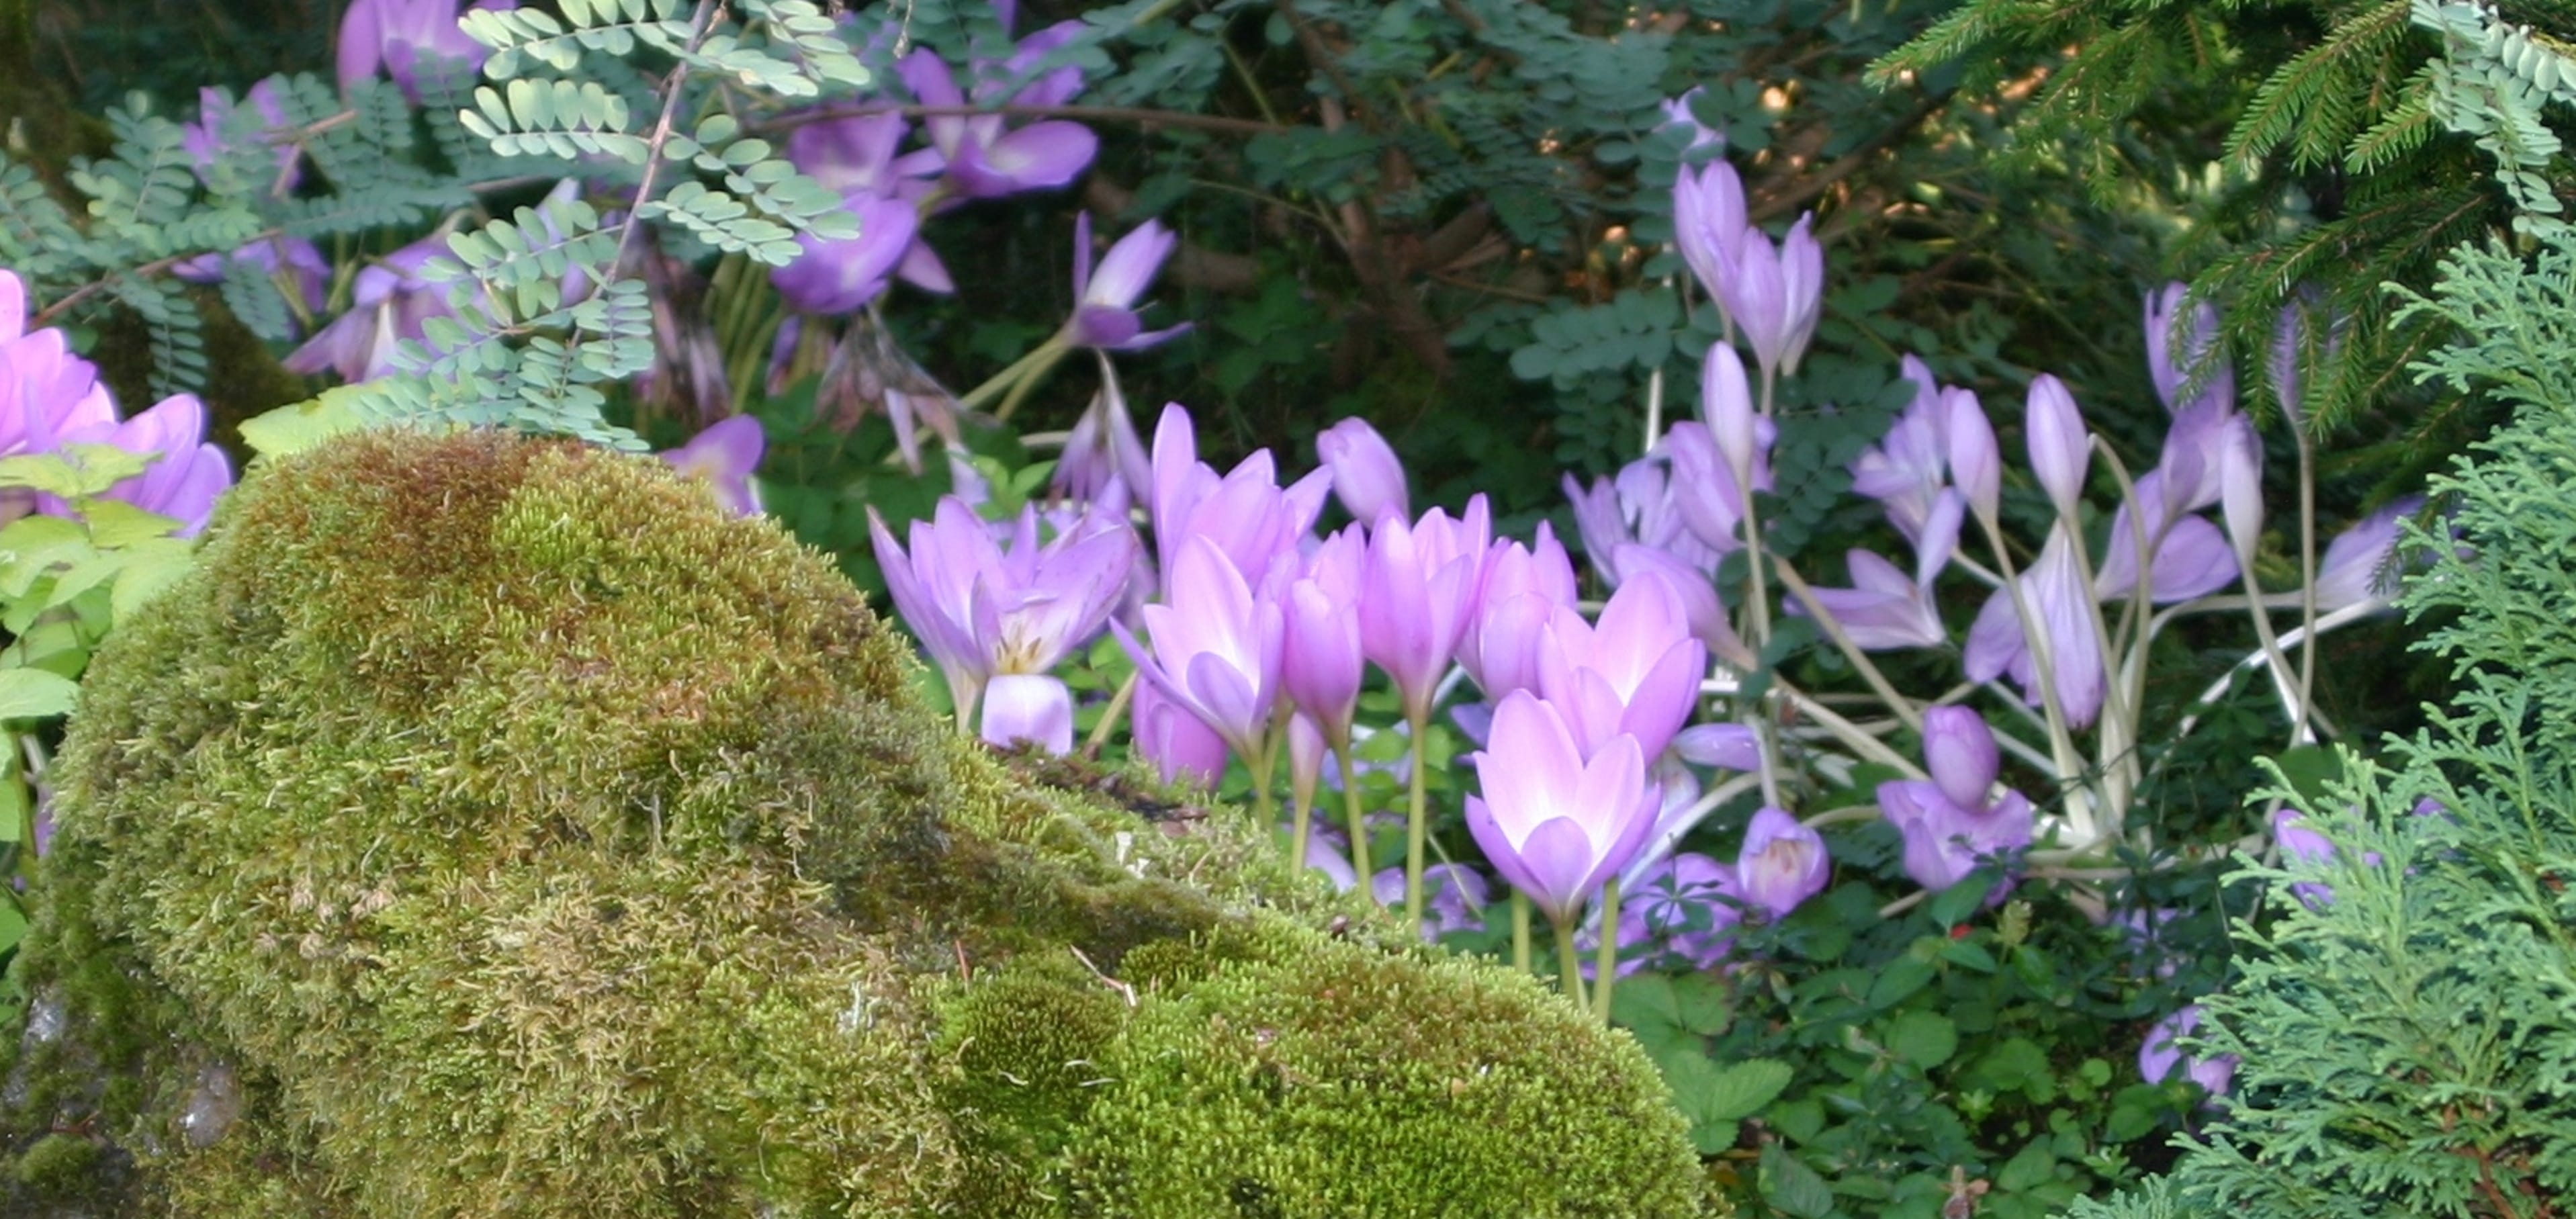 Drop into your favorite local nursery and pick up a selection of the crocus-like, autumn-blooming colchicums.